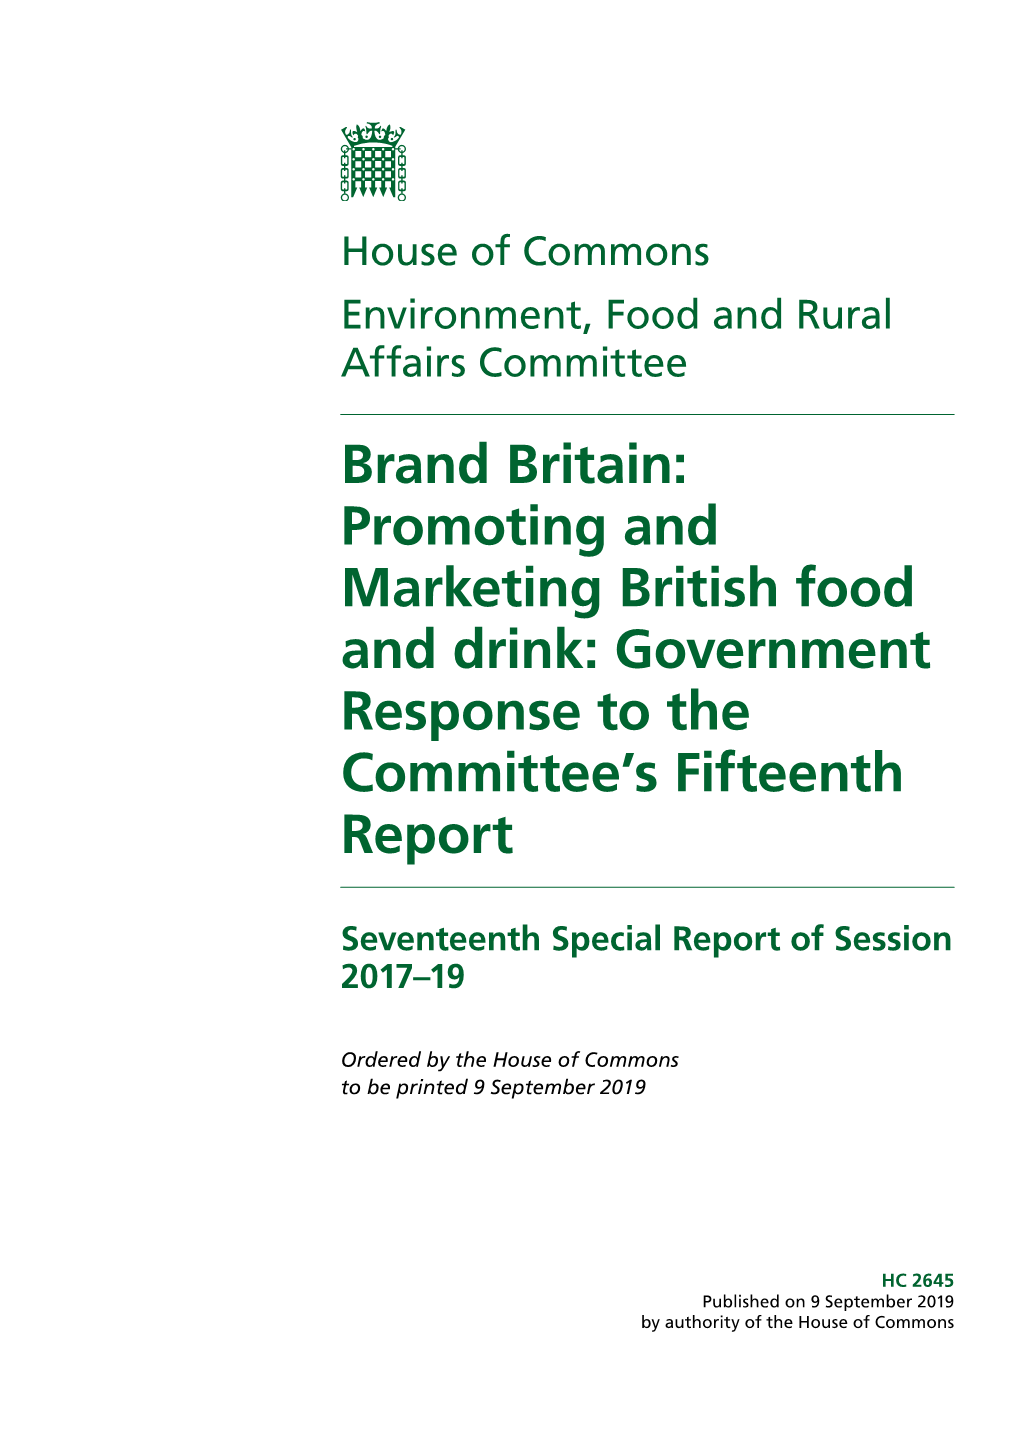 Government Response to the Committee’S Fifteenth Report